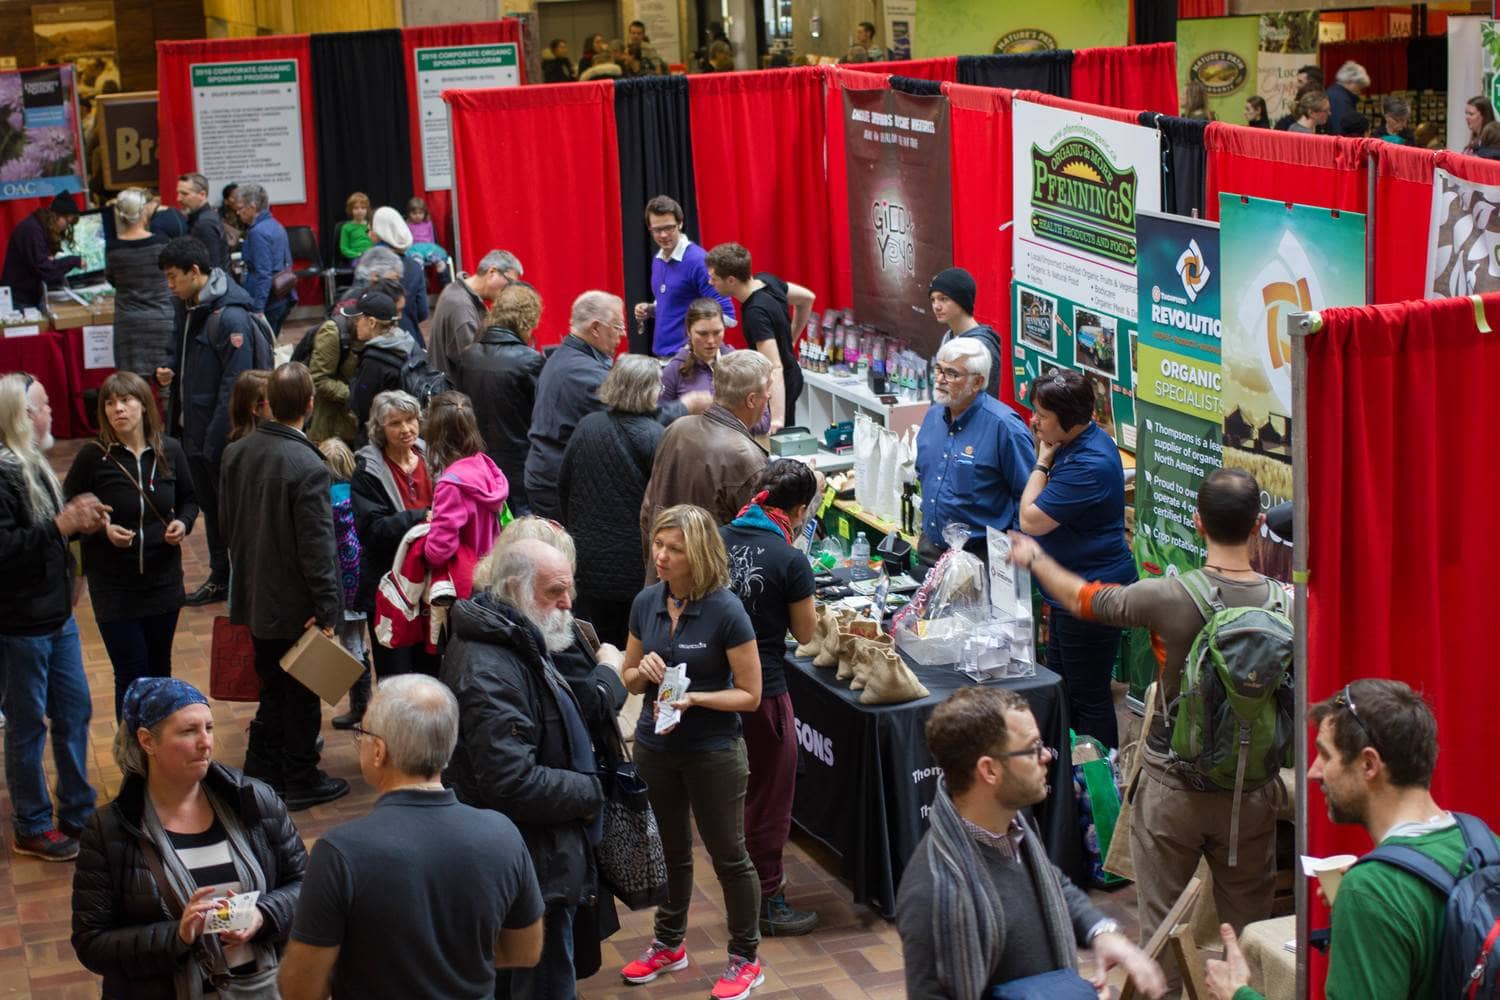 An Exhibitor Sampling at the Guelph Organic Conference